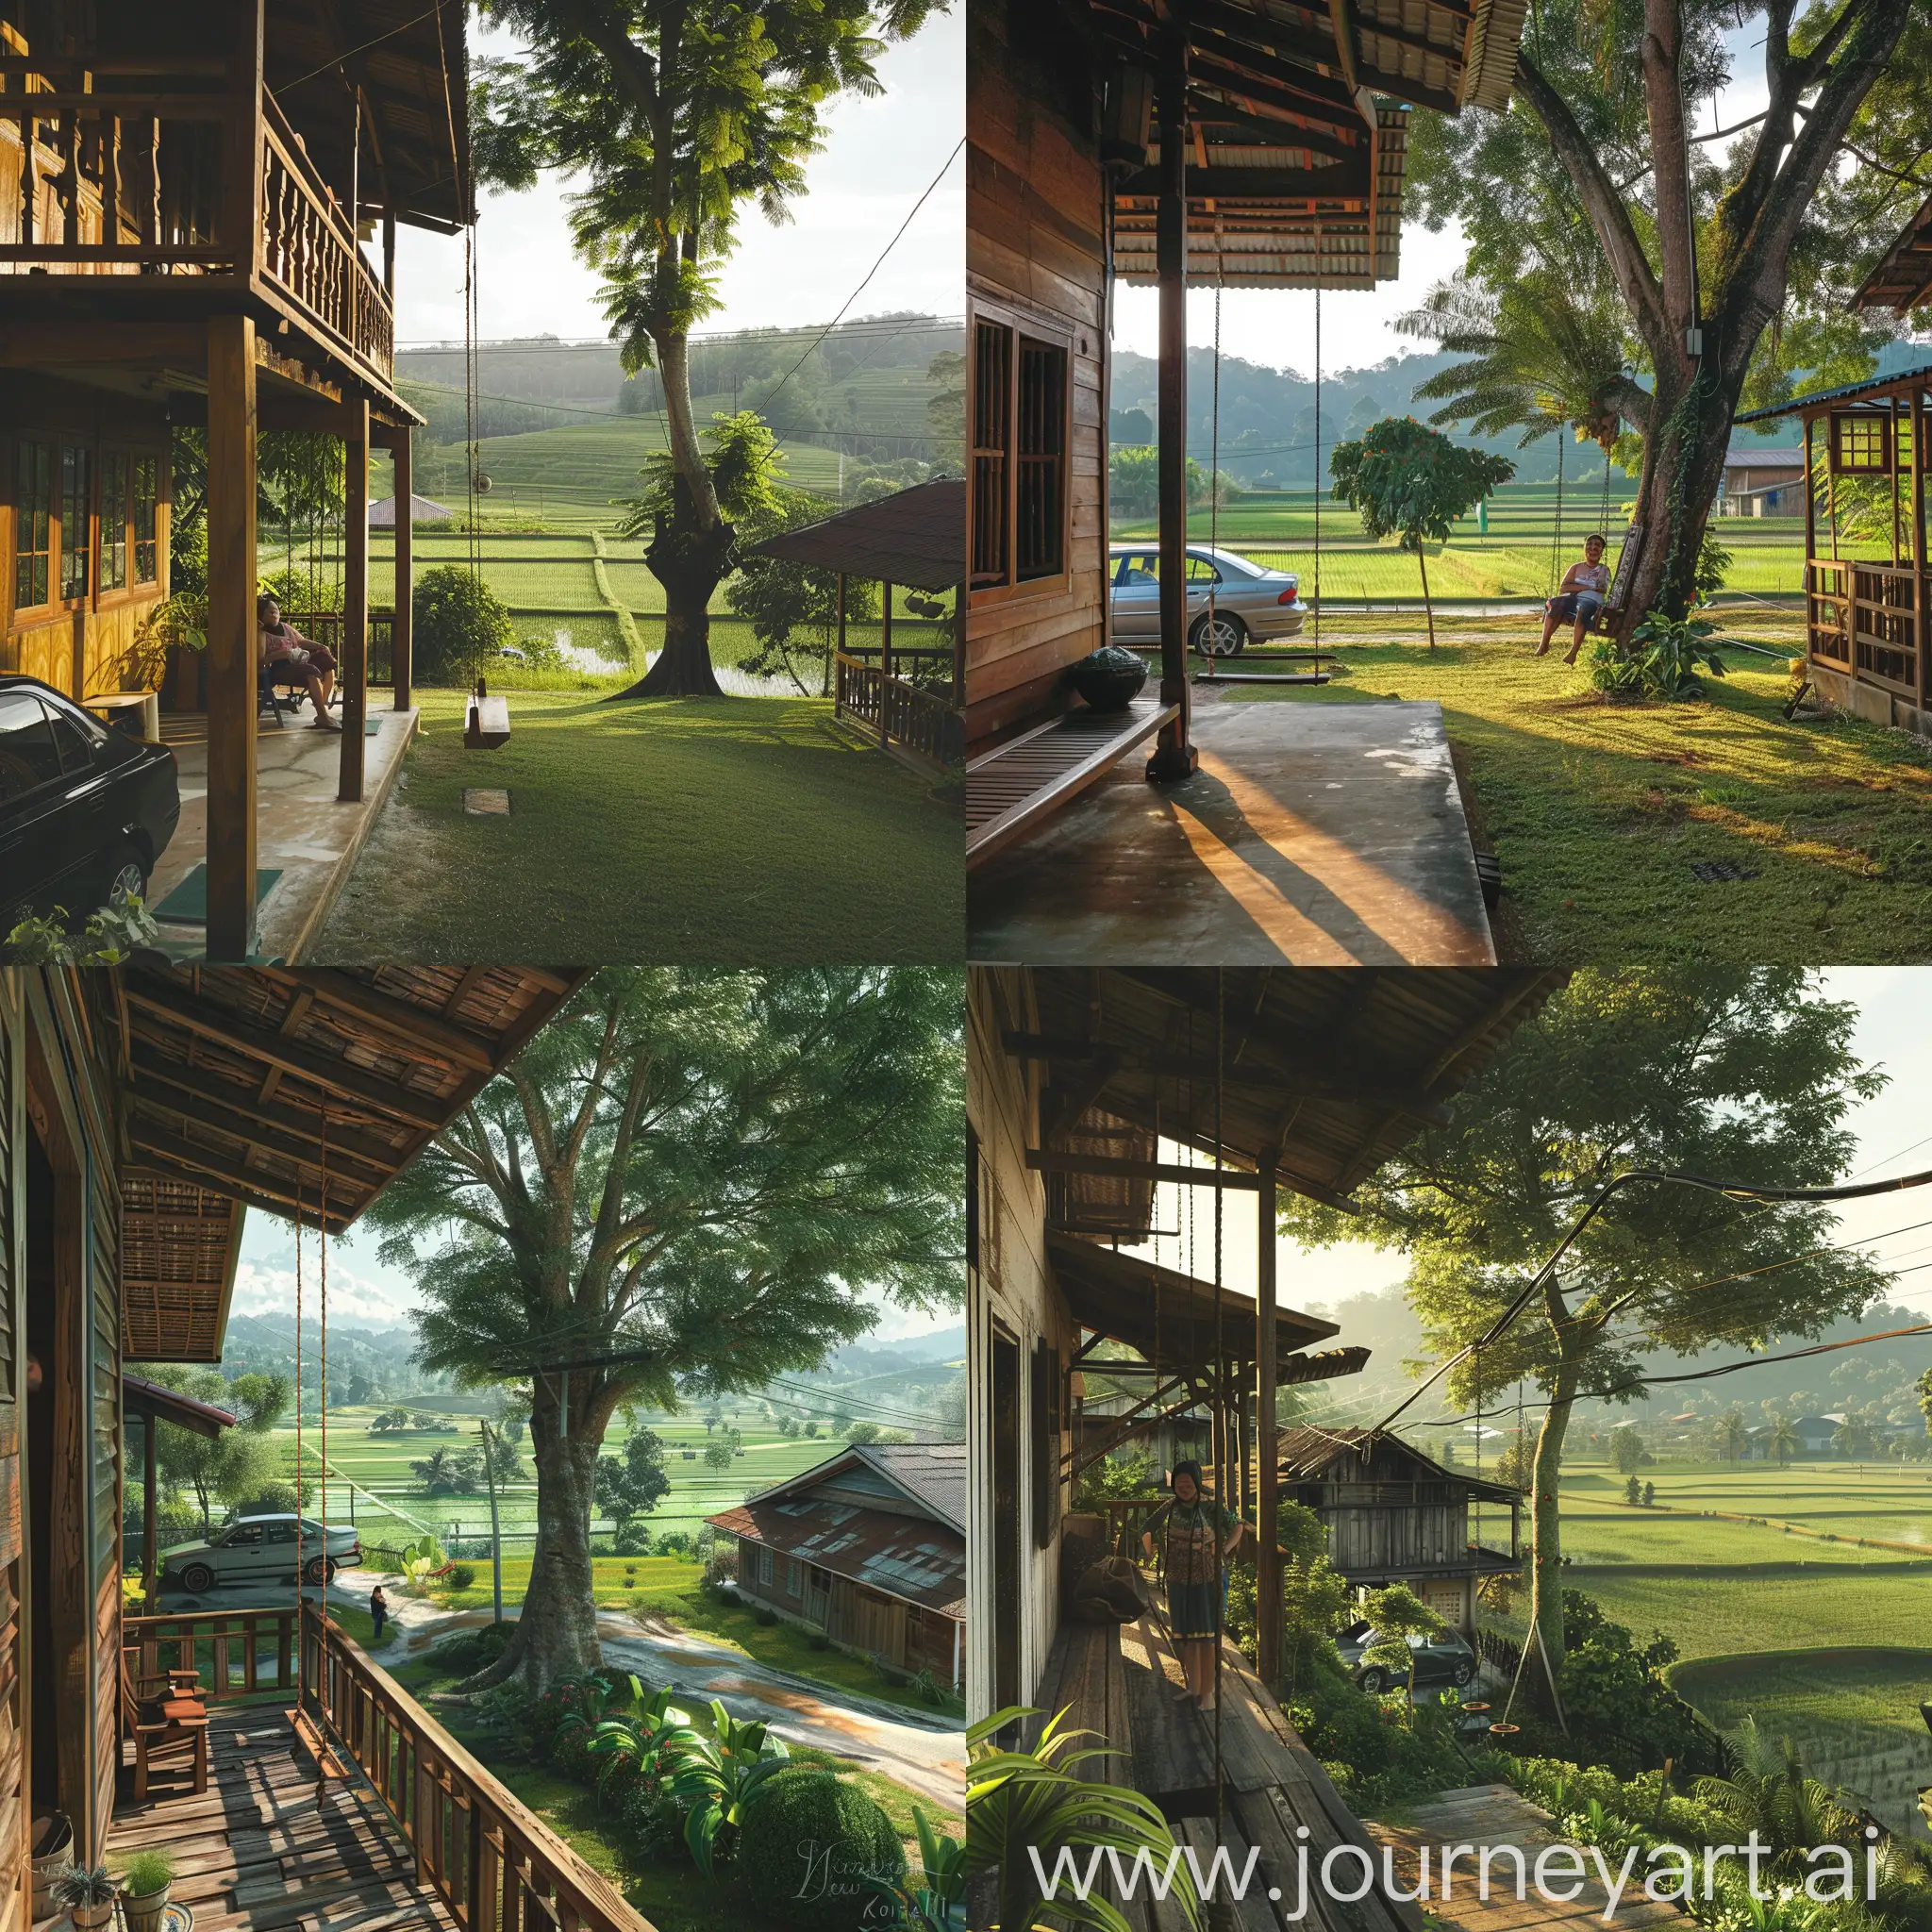 Morning-Serenity-at-Wooden-Kampung-House-with-Swing-and-Rice-Fields-View